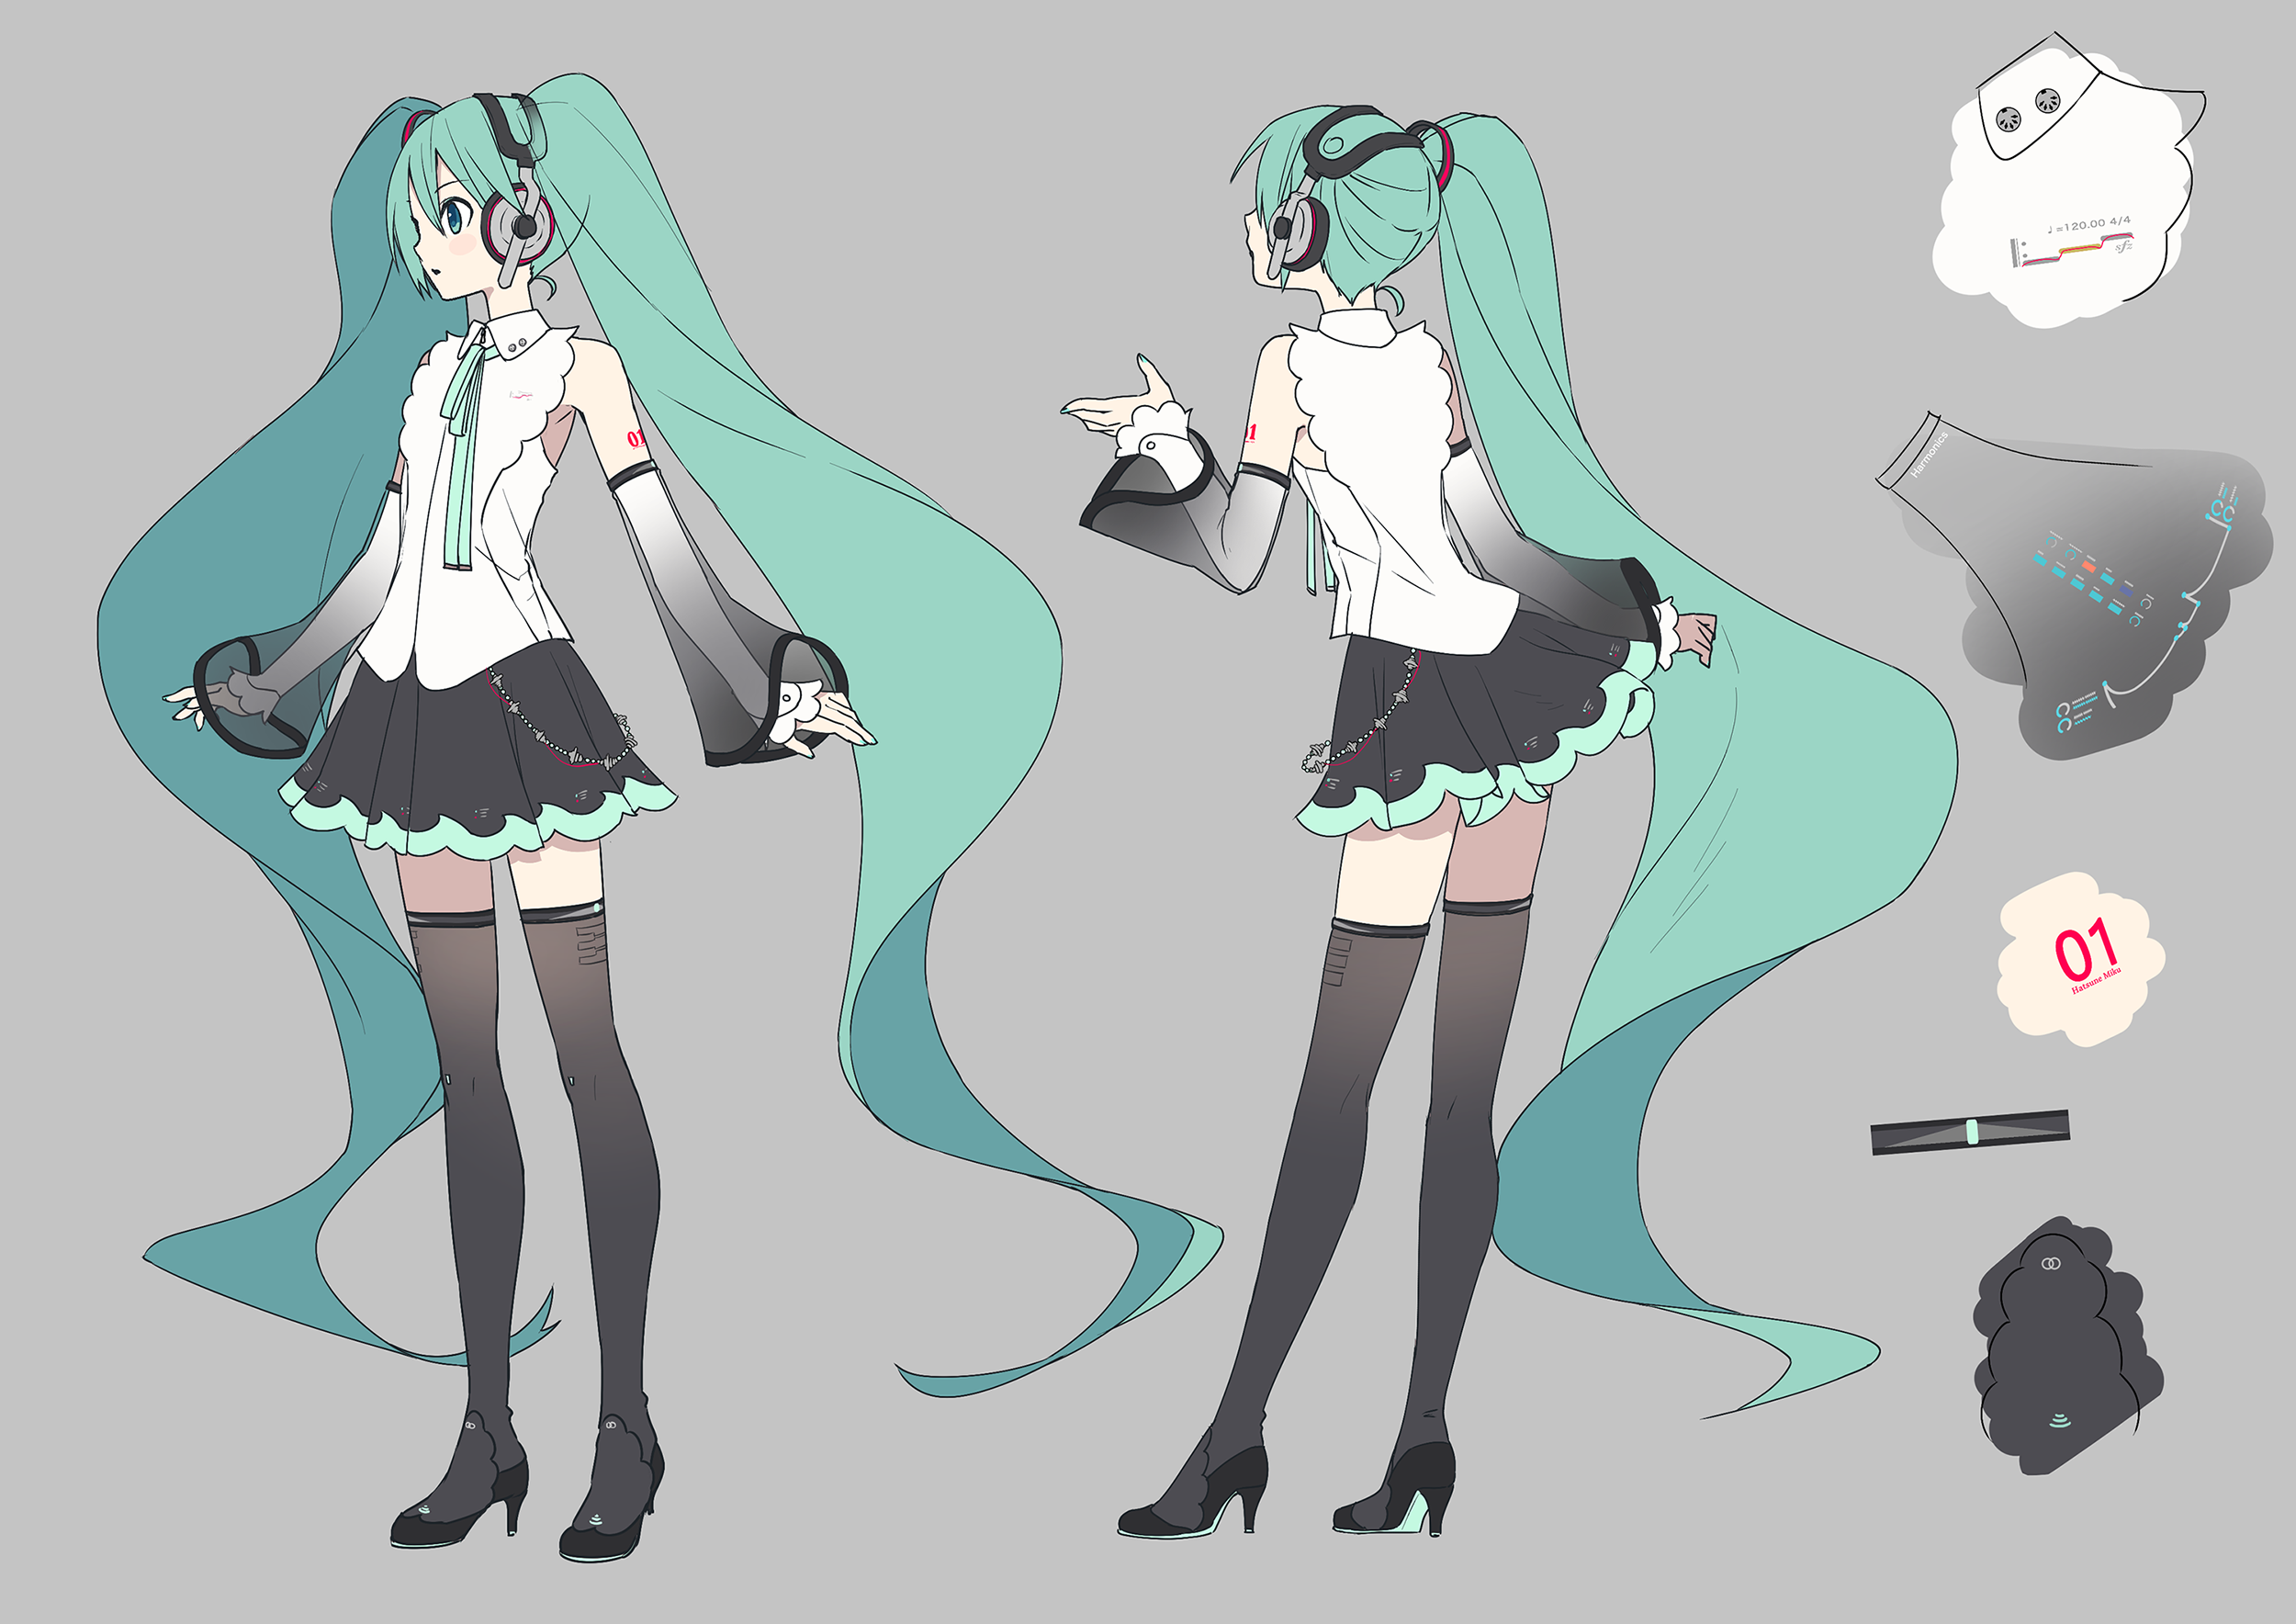 Hatsune Miku NT Finalized Design Officially Released